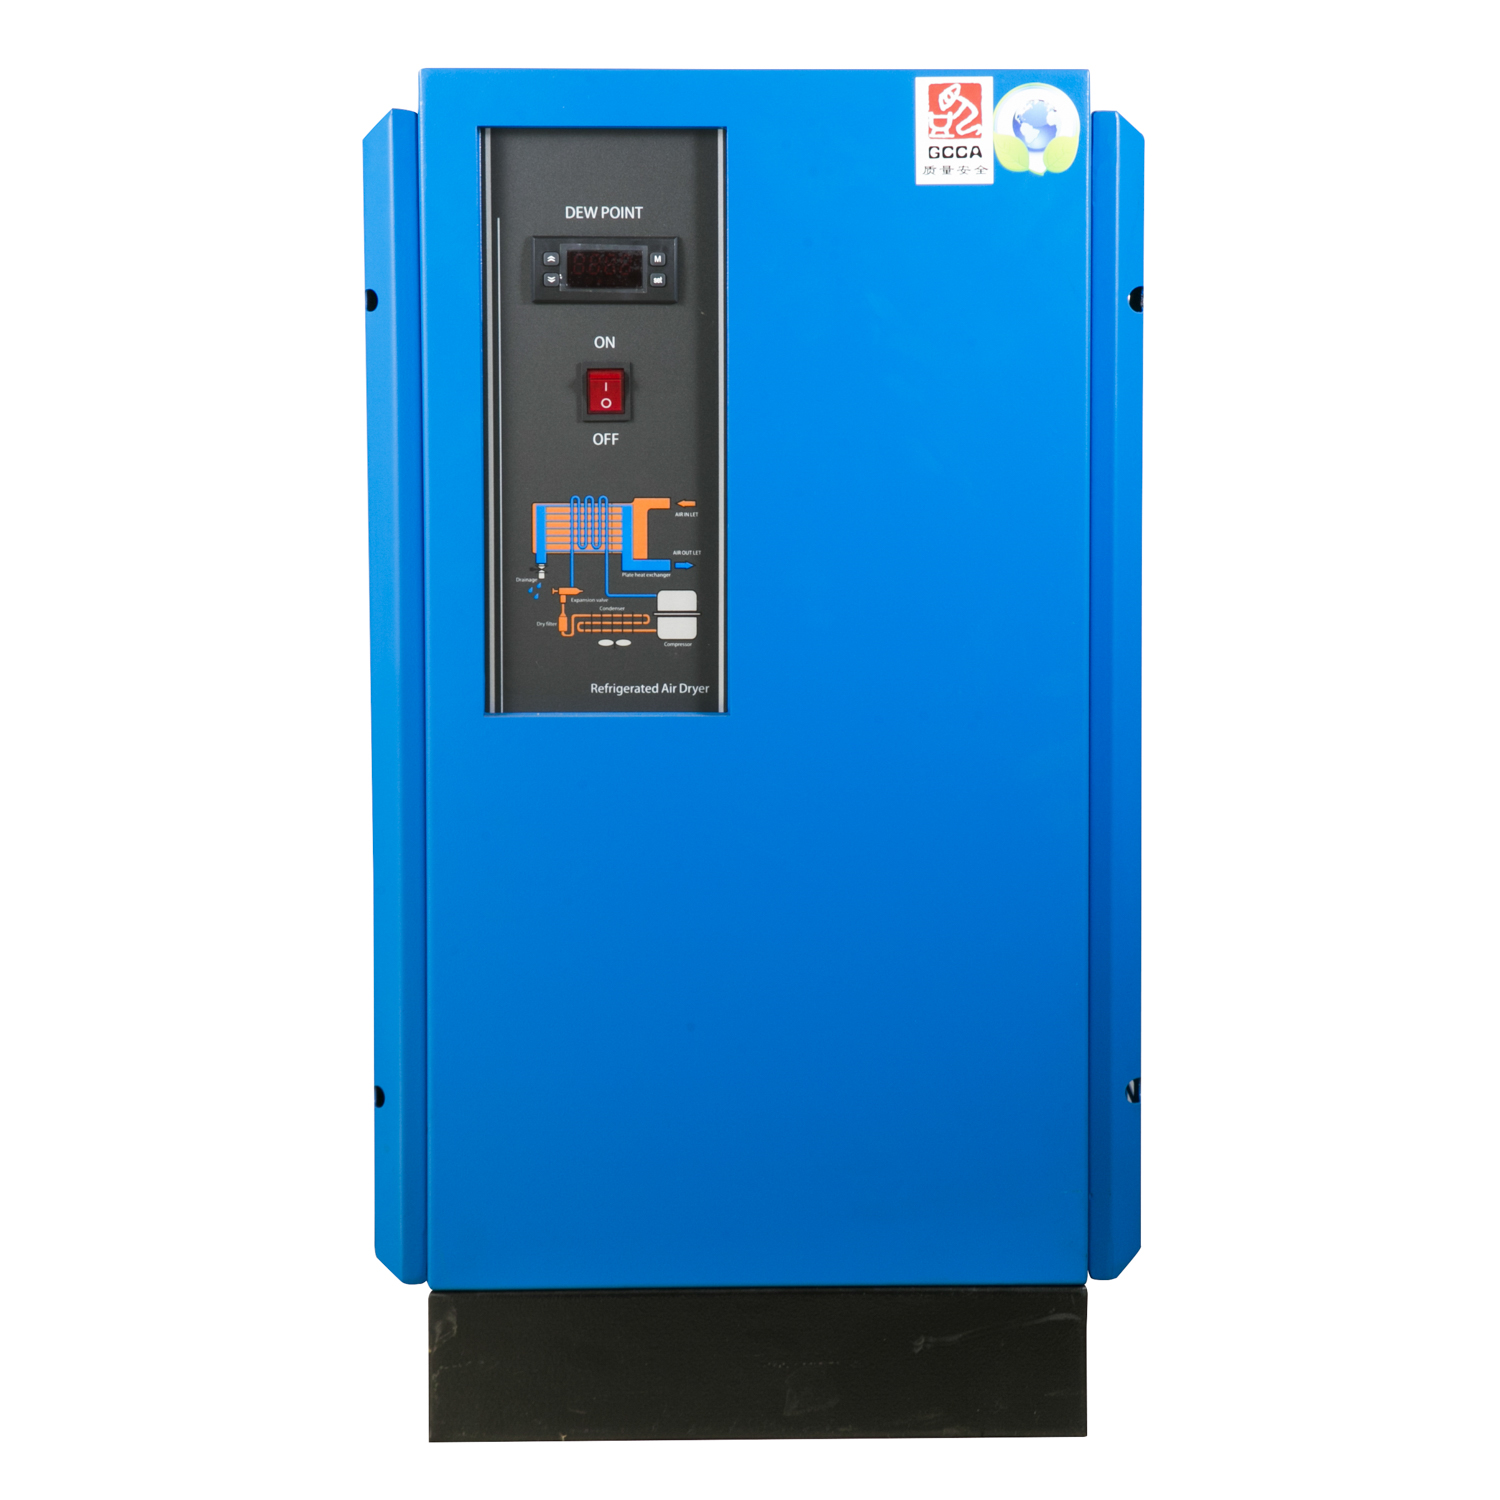 What are the characteristics of low pressure refrigerated air dryer?